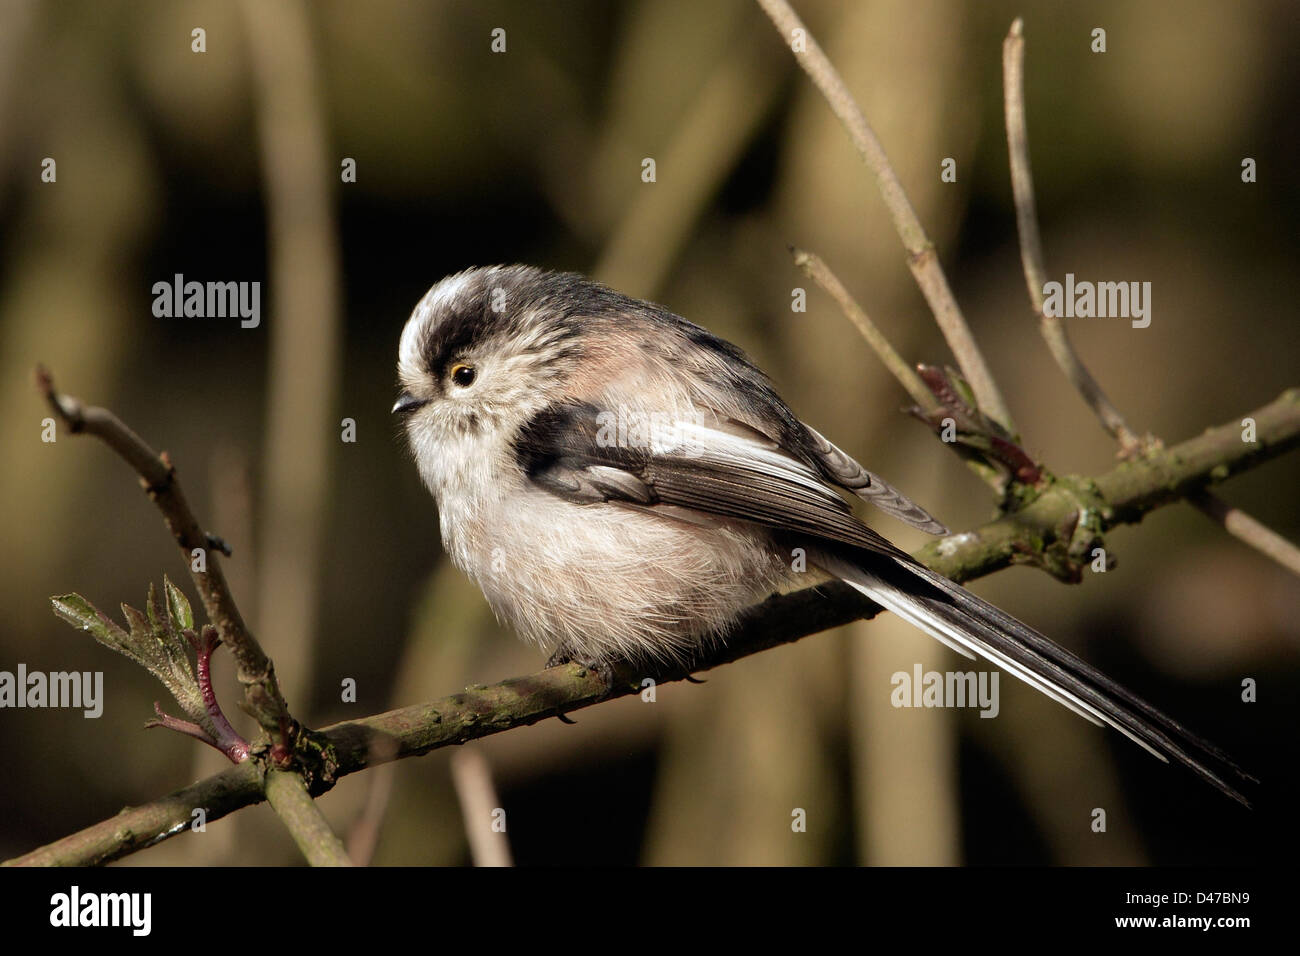 A Long-Tailed Tit (Aegithalos caudatus) perched on a tree branch. Stock Photo